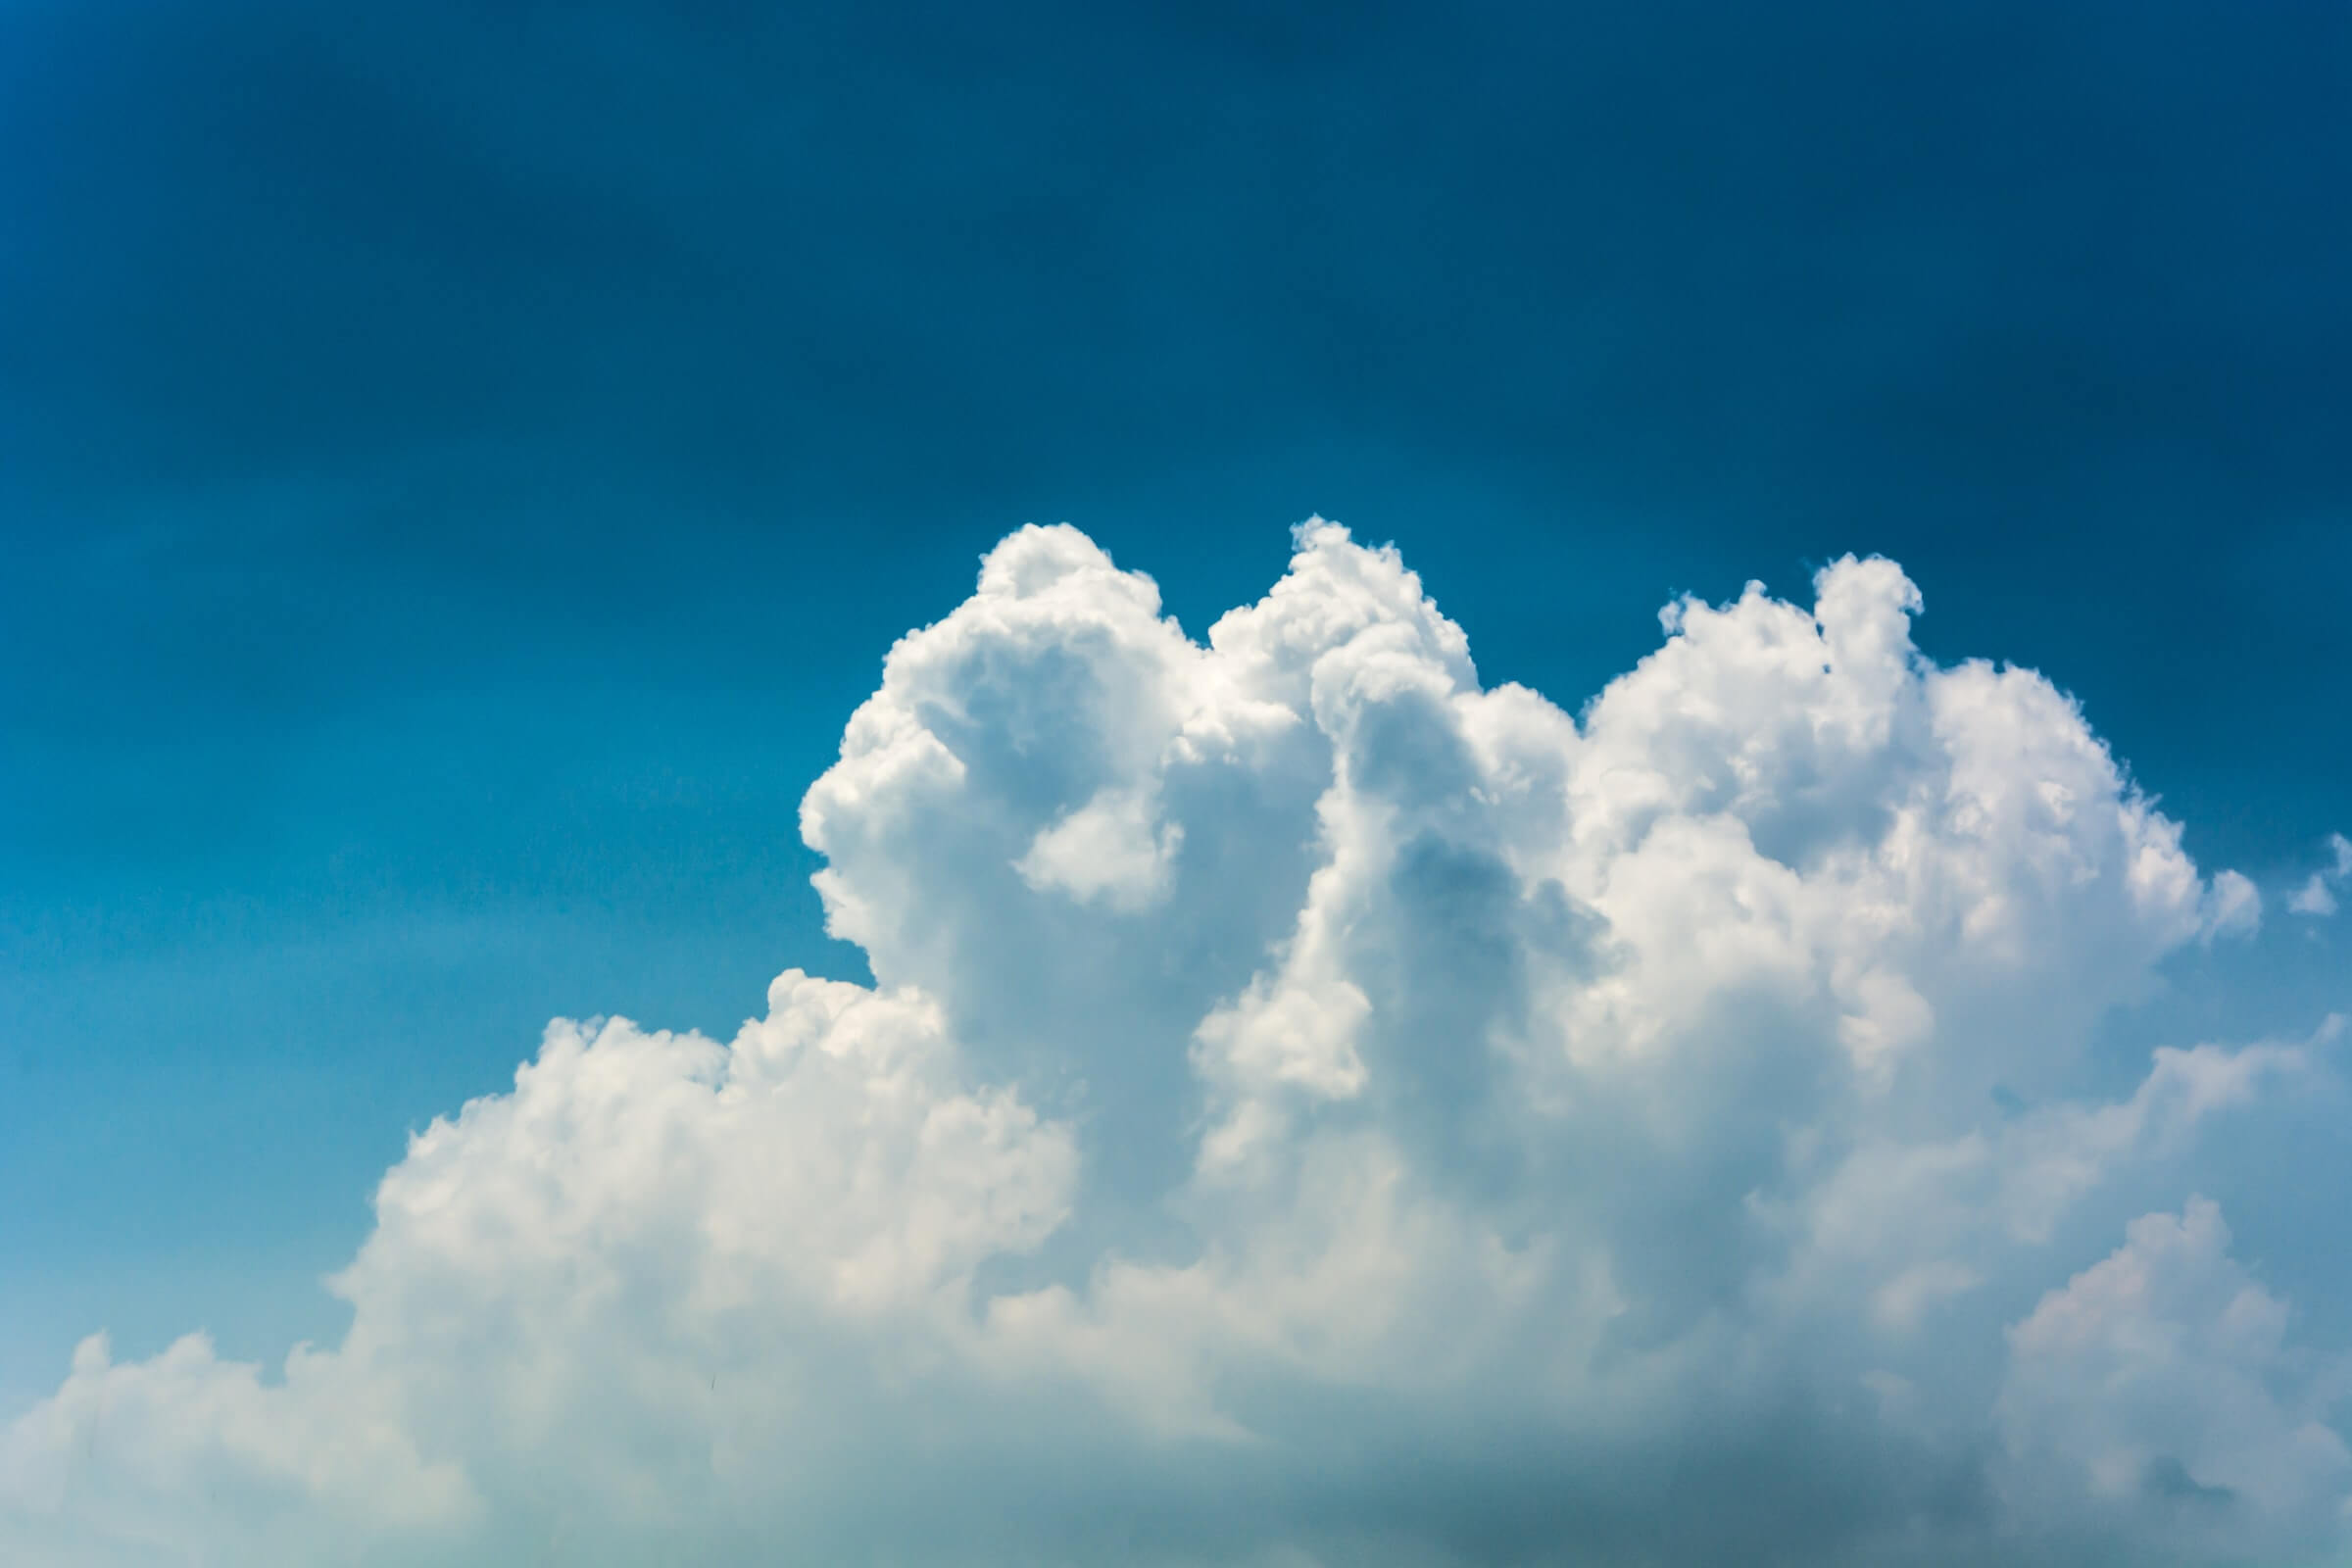 Download this free HD photo of Cloud, Cloud HD Wallpaper, Cloudy HD Background Wallpaper